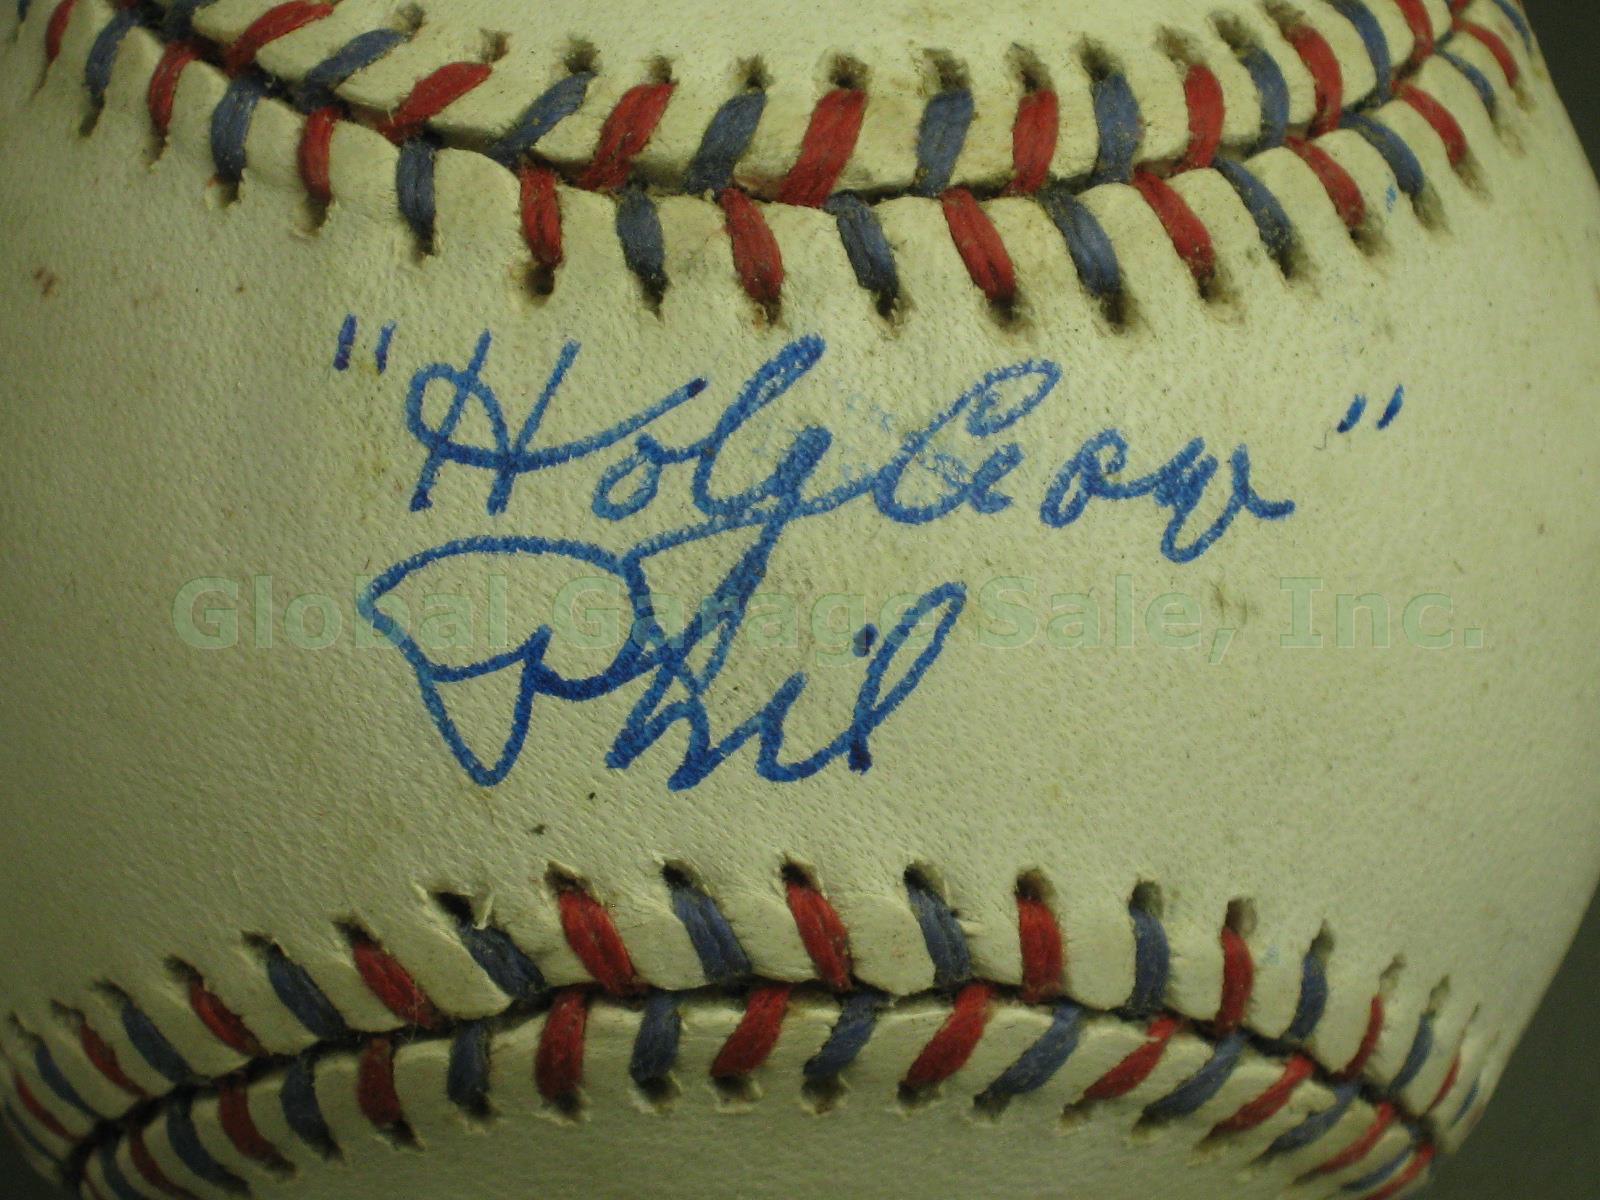 2 Signed Baseballs Phil Holy Cow Rizutto Reggie Jackson NY Yankees Hall Of Fame 2